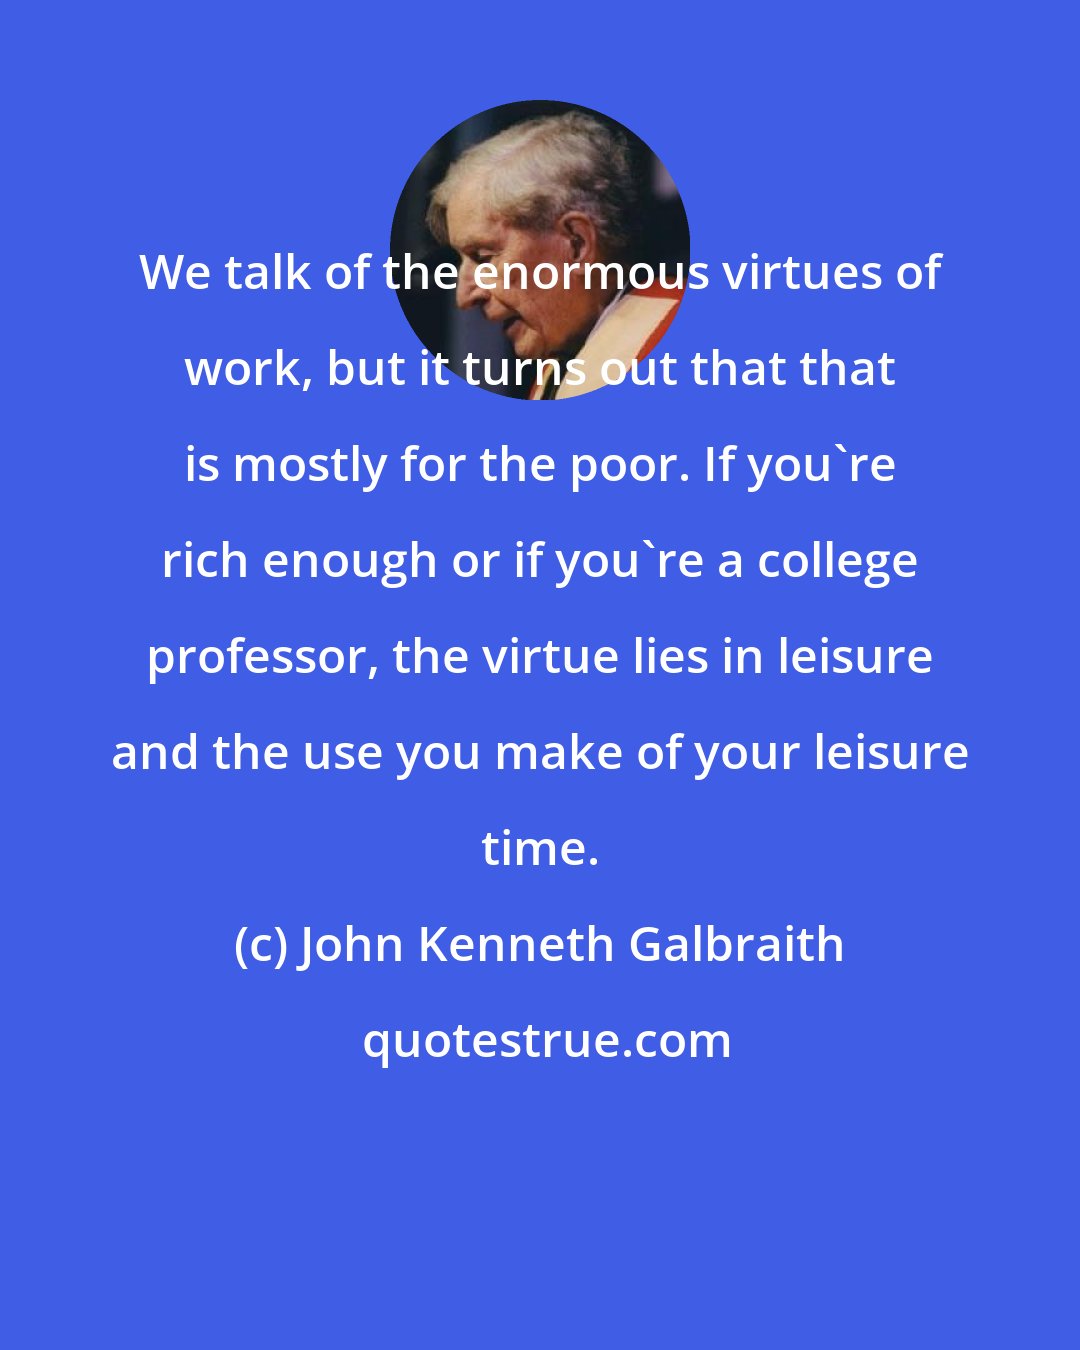 John Kenneth Galbraith: We talk of the enormous virtues of work, but it turns out that that is mostly for the poor. If you're rich enough or if you're a college professor, the virtue lies in leisure and the use you make of your leisure time.